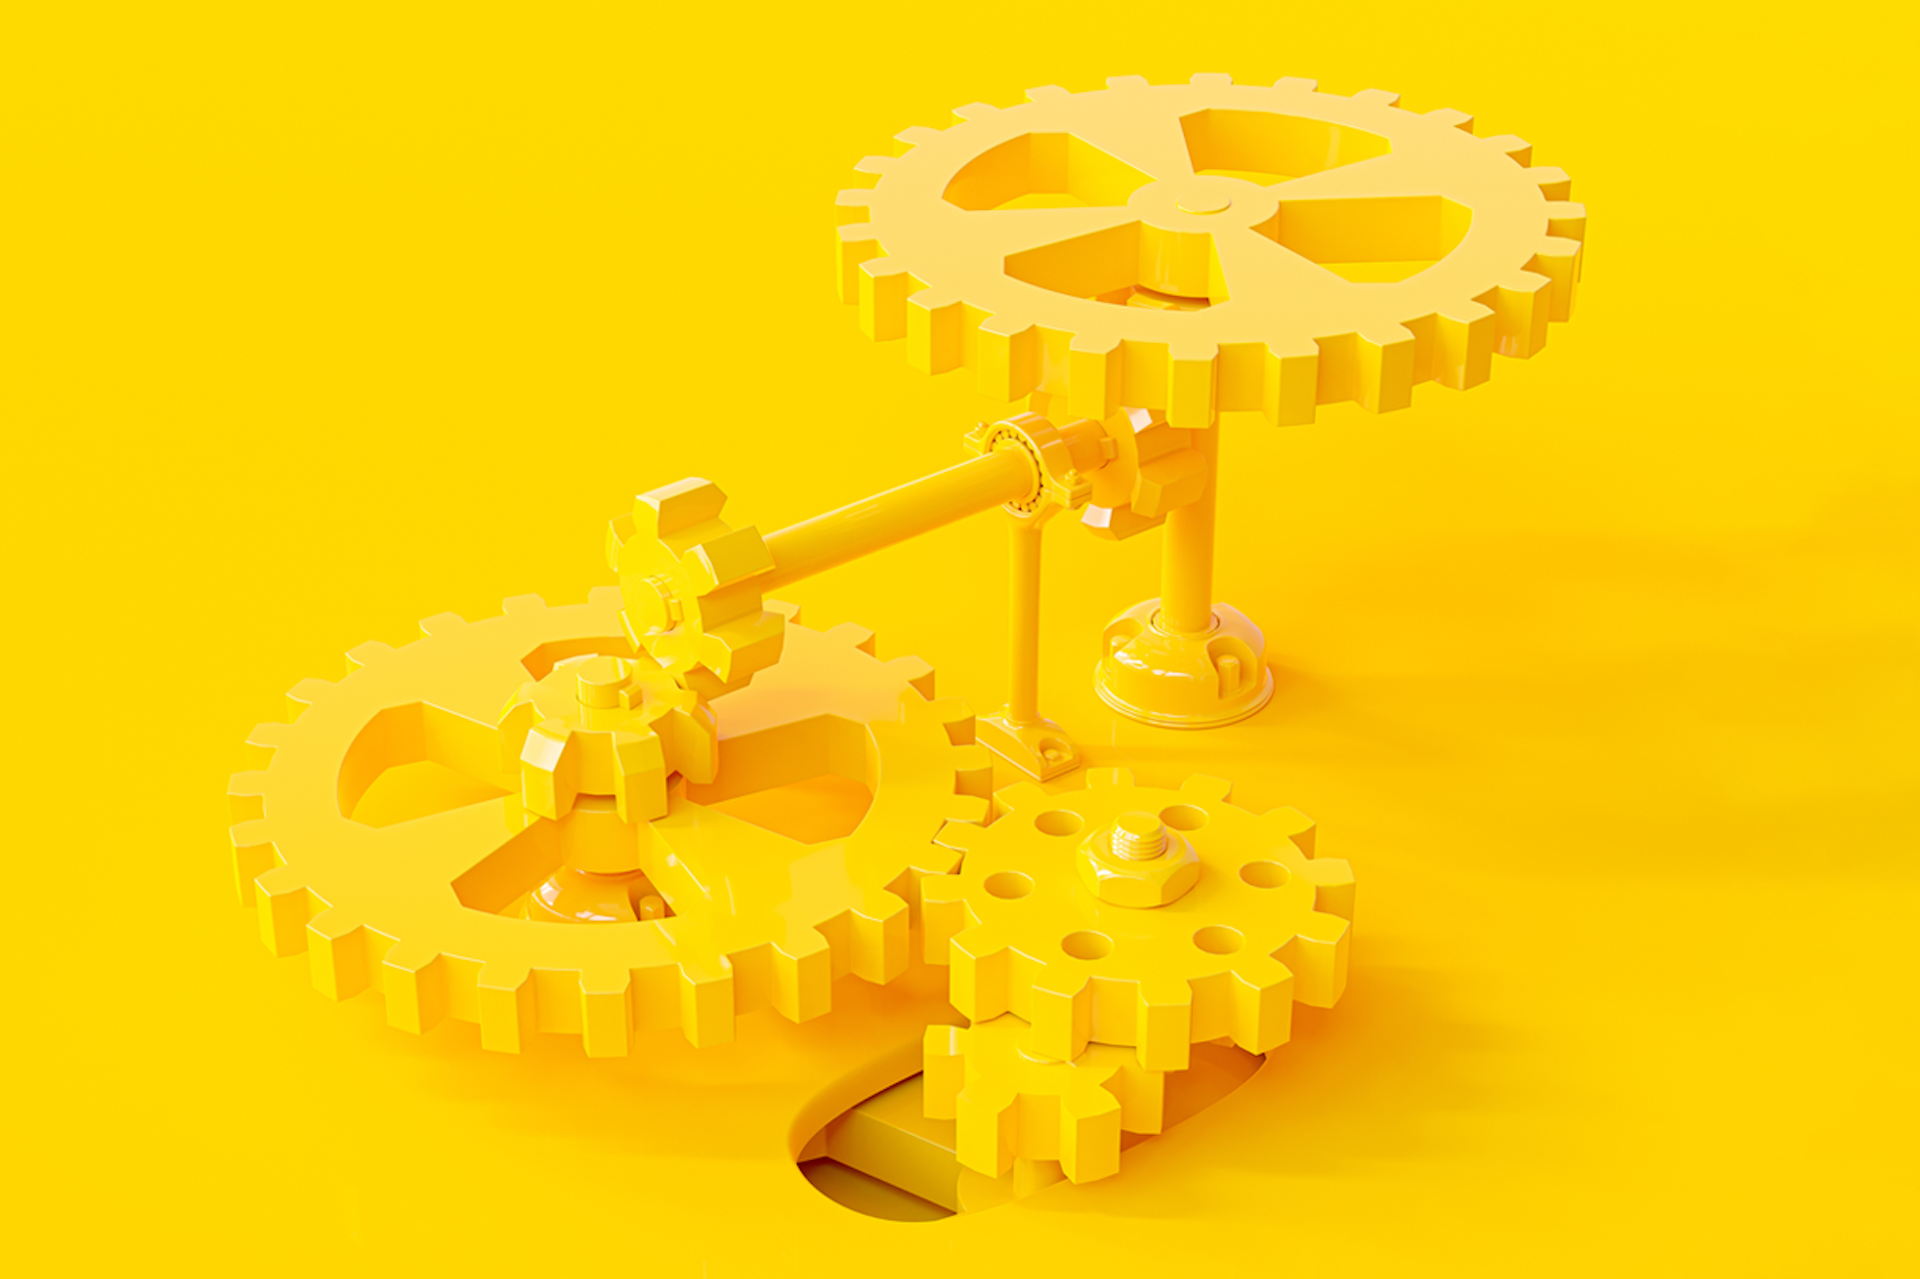 Image showing yellow cogs and gears on a bright yellow background. Industry 4.0 guide.